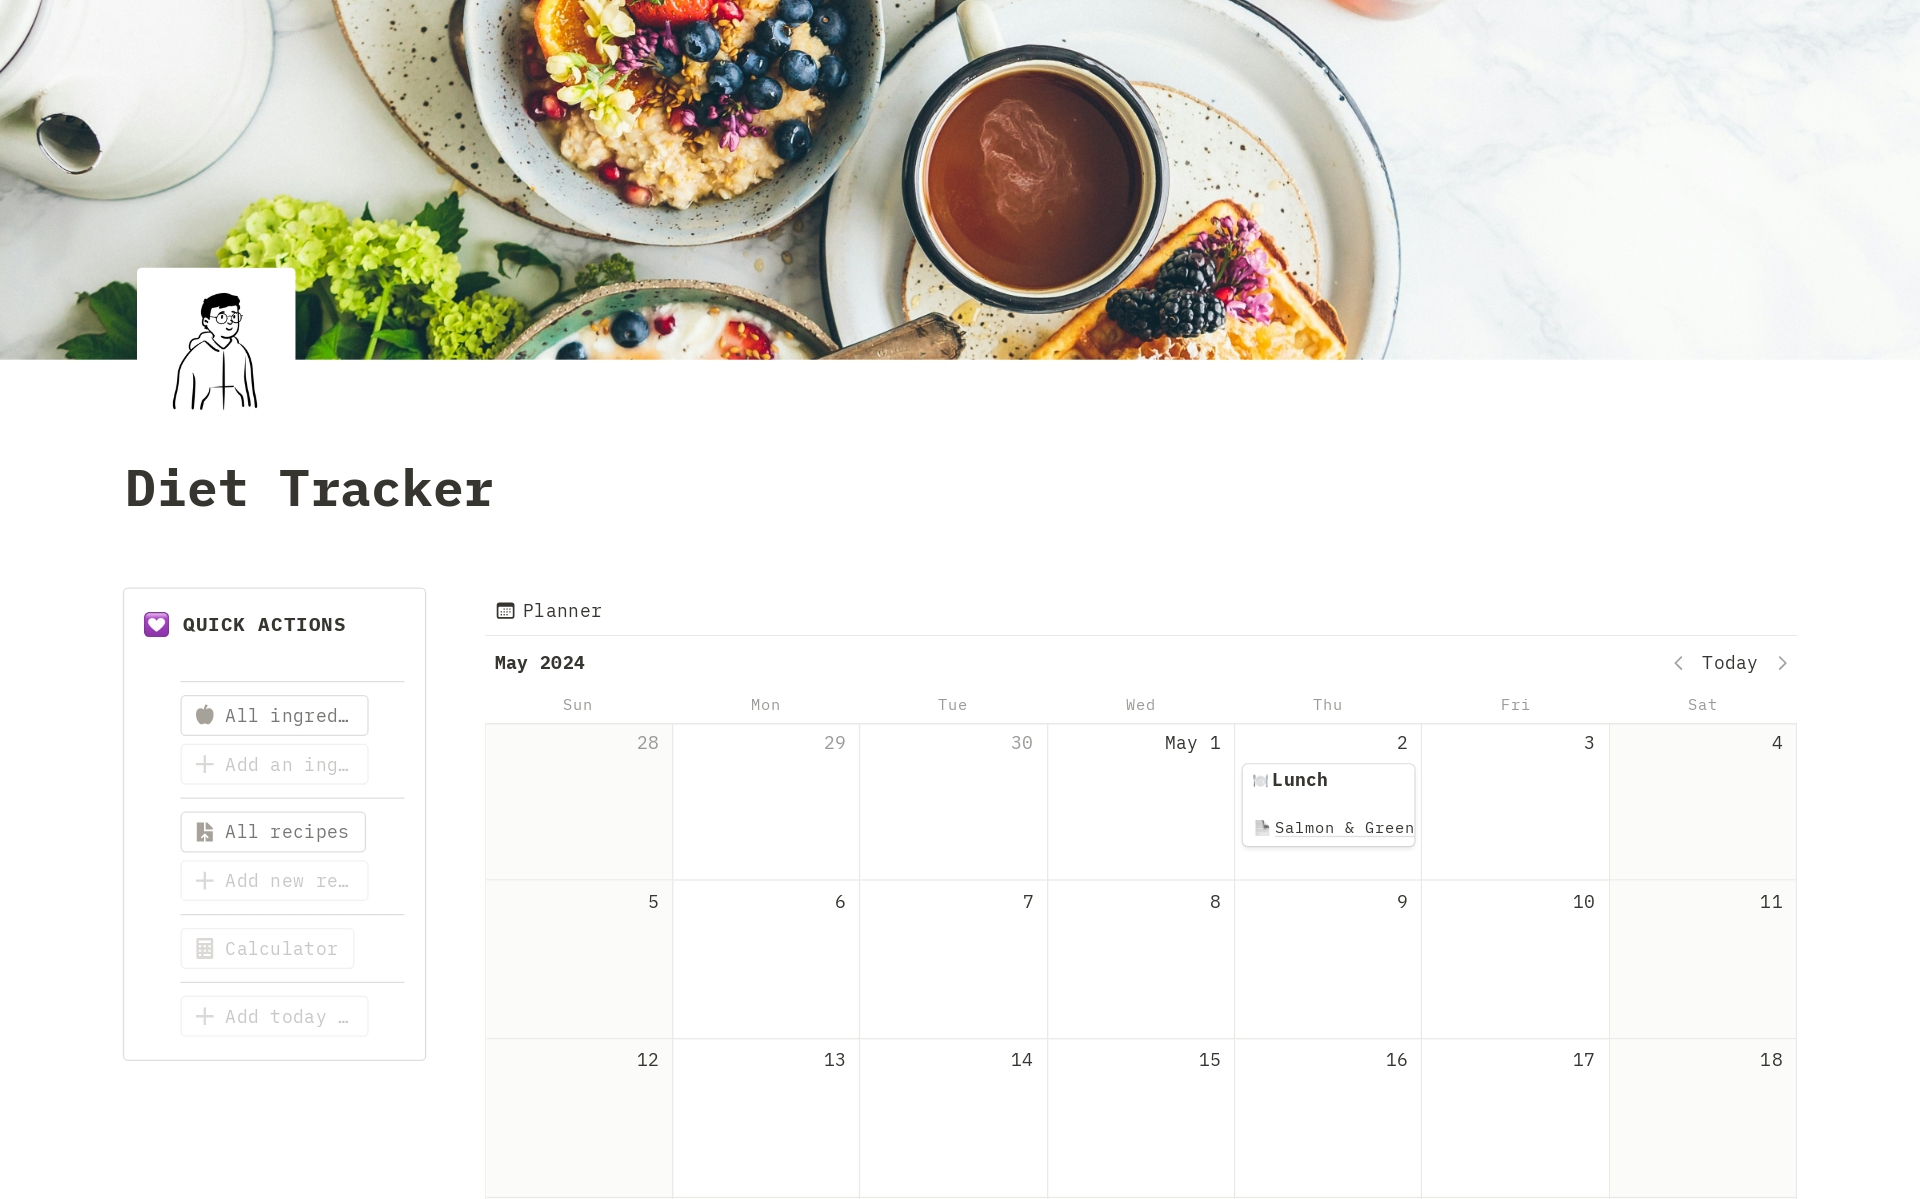 With this Notion template, you will be able to track what you eat with precision ! 
But also create recipes, calculate calories / carbohydrates / lipids / proteins by ingredients and plan your meal prep. All this in one place ! 